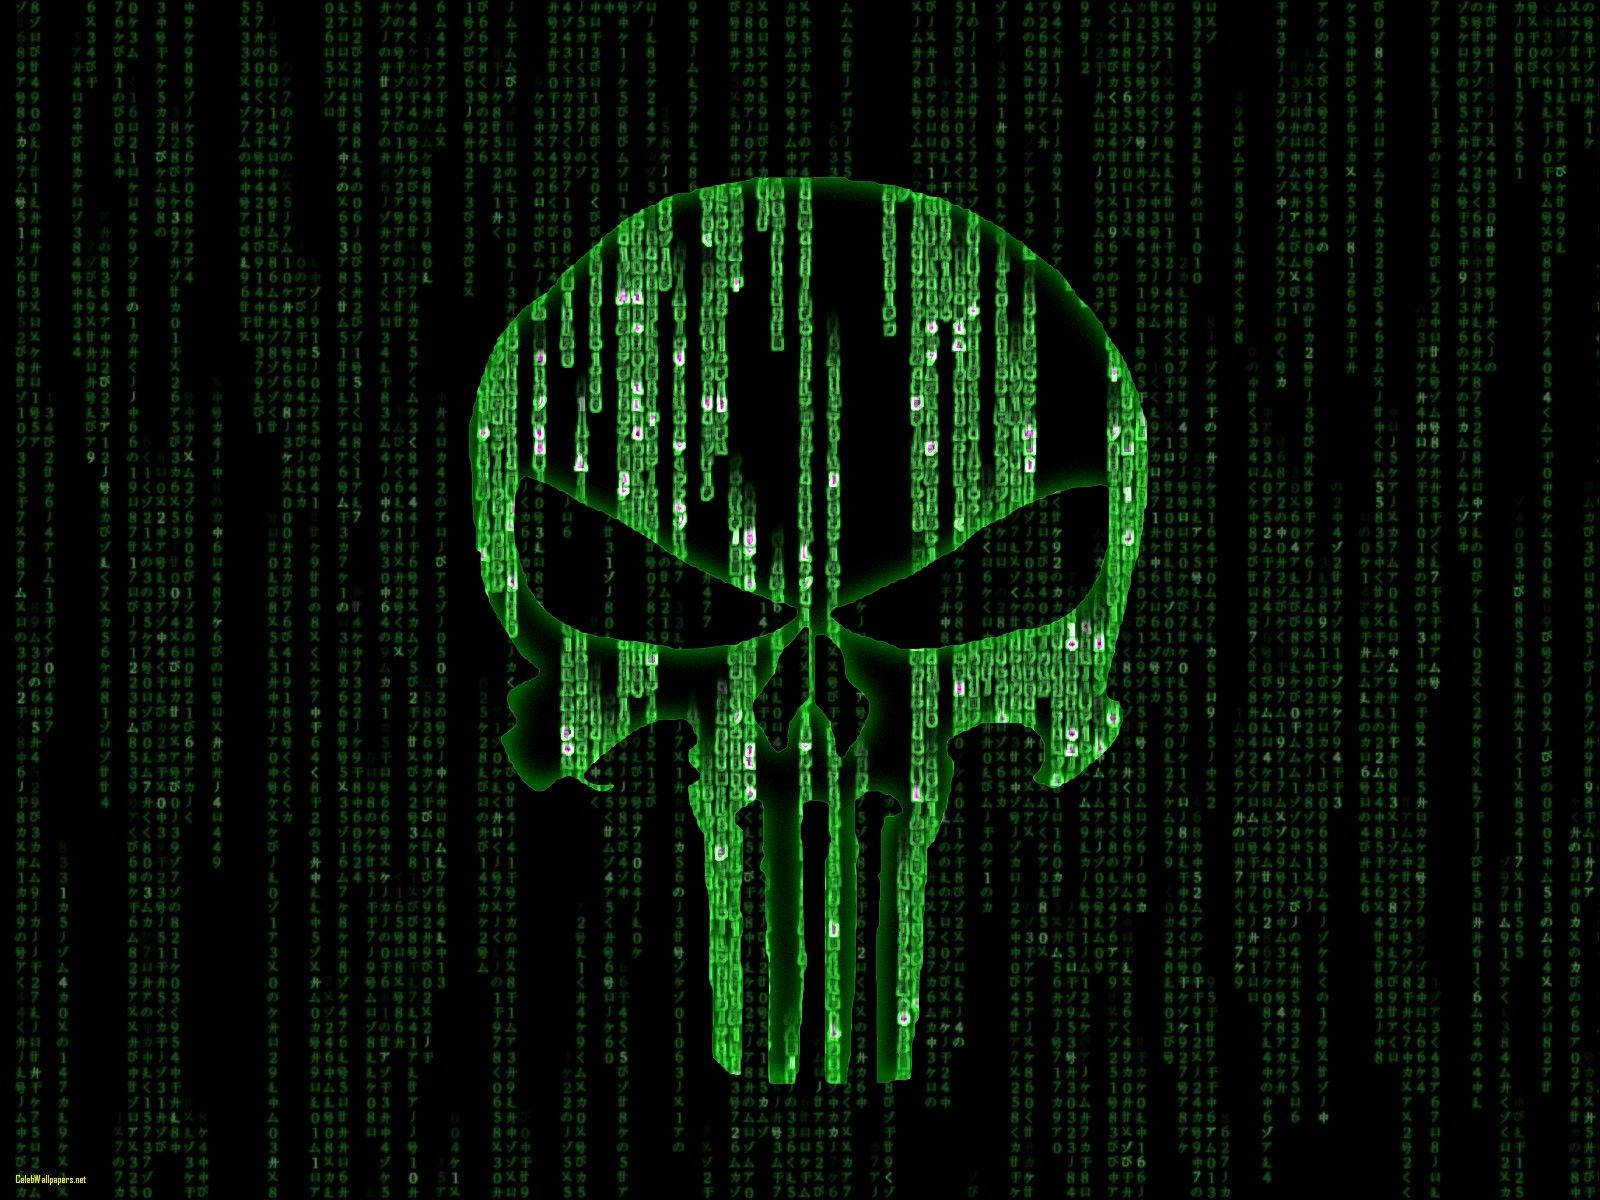 Download Punisher wallpaper by reachparmeet - 25 - Free on ZEDGE